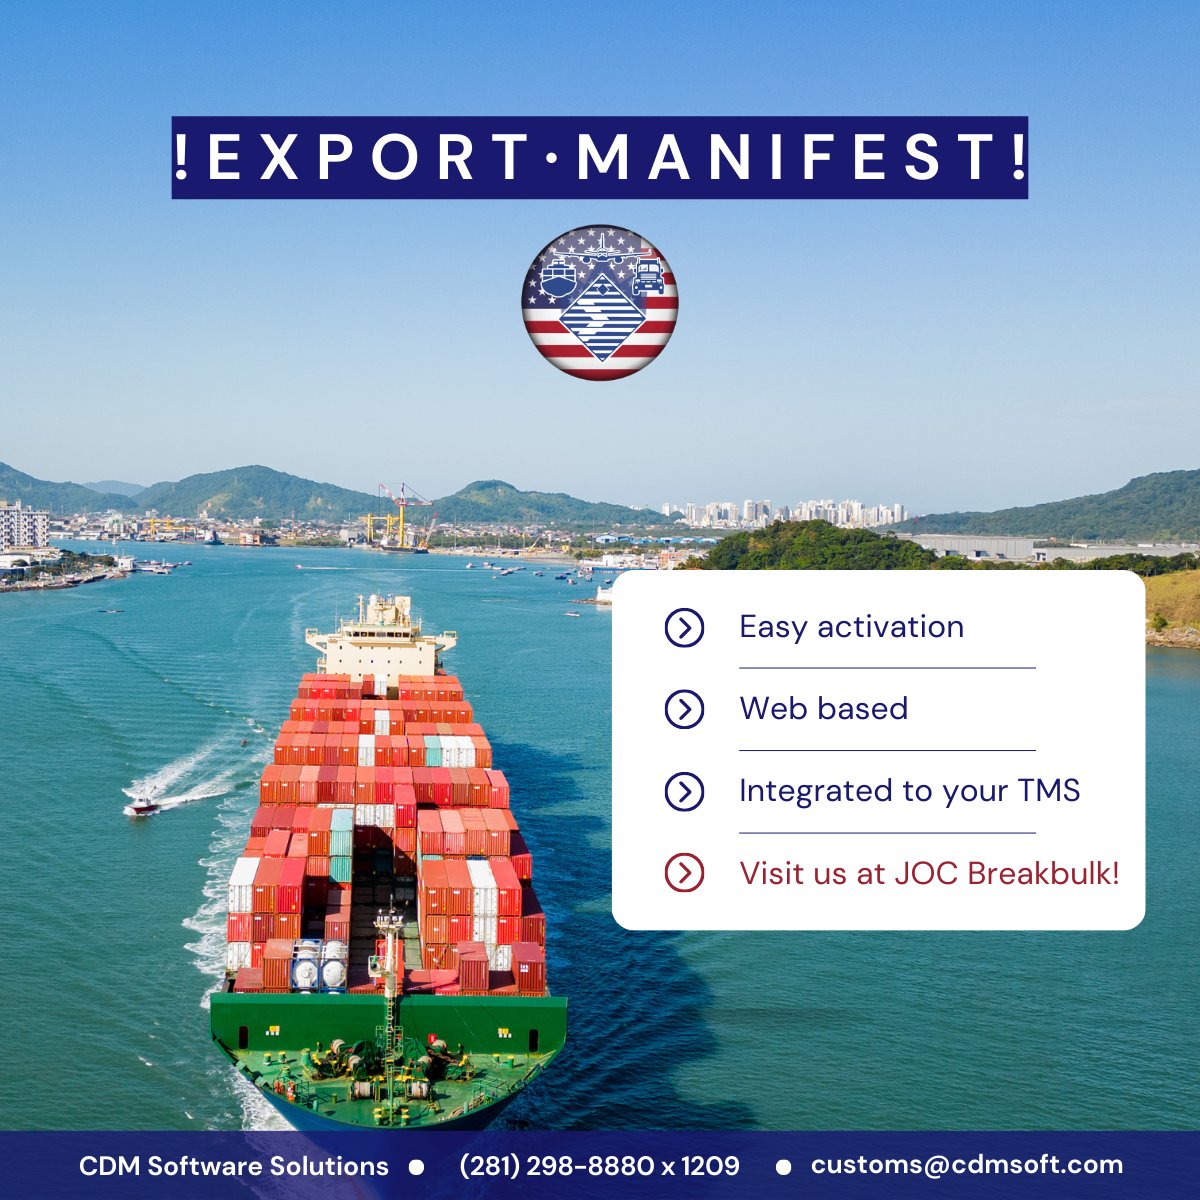 Day 2 of JOC #Breakbulk24! Come chat with us about expediting your #export manifests.

#seafreight #freightforwarding #logistics #freight #cargo